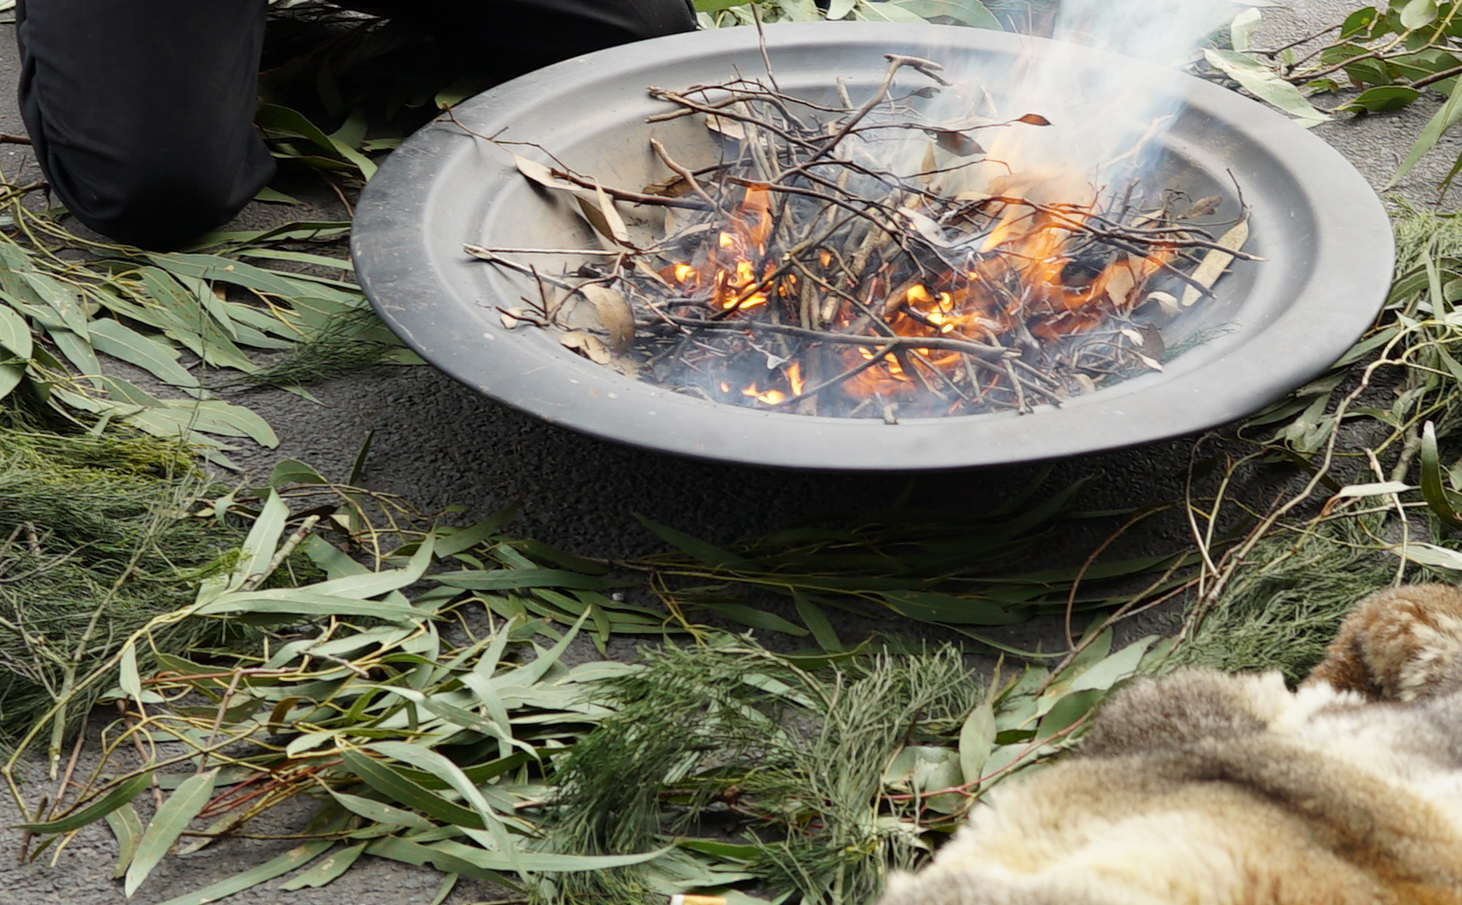 A fire pit surrounded by gum leaves